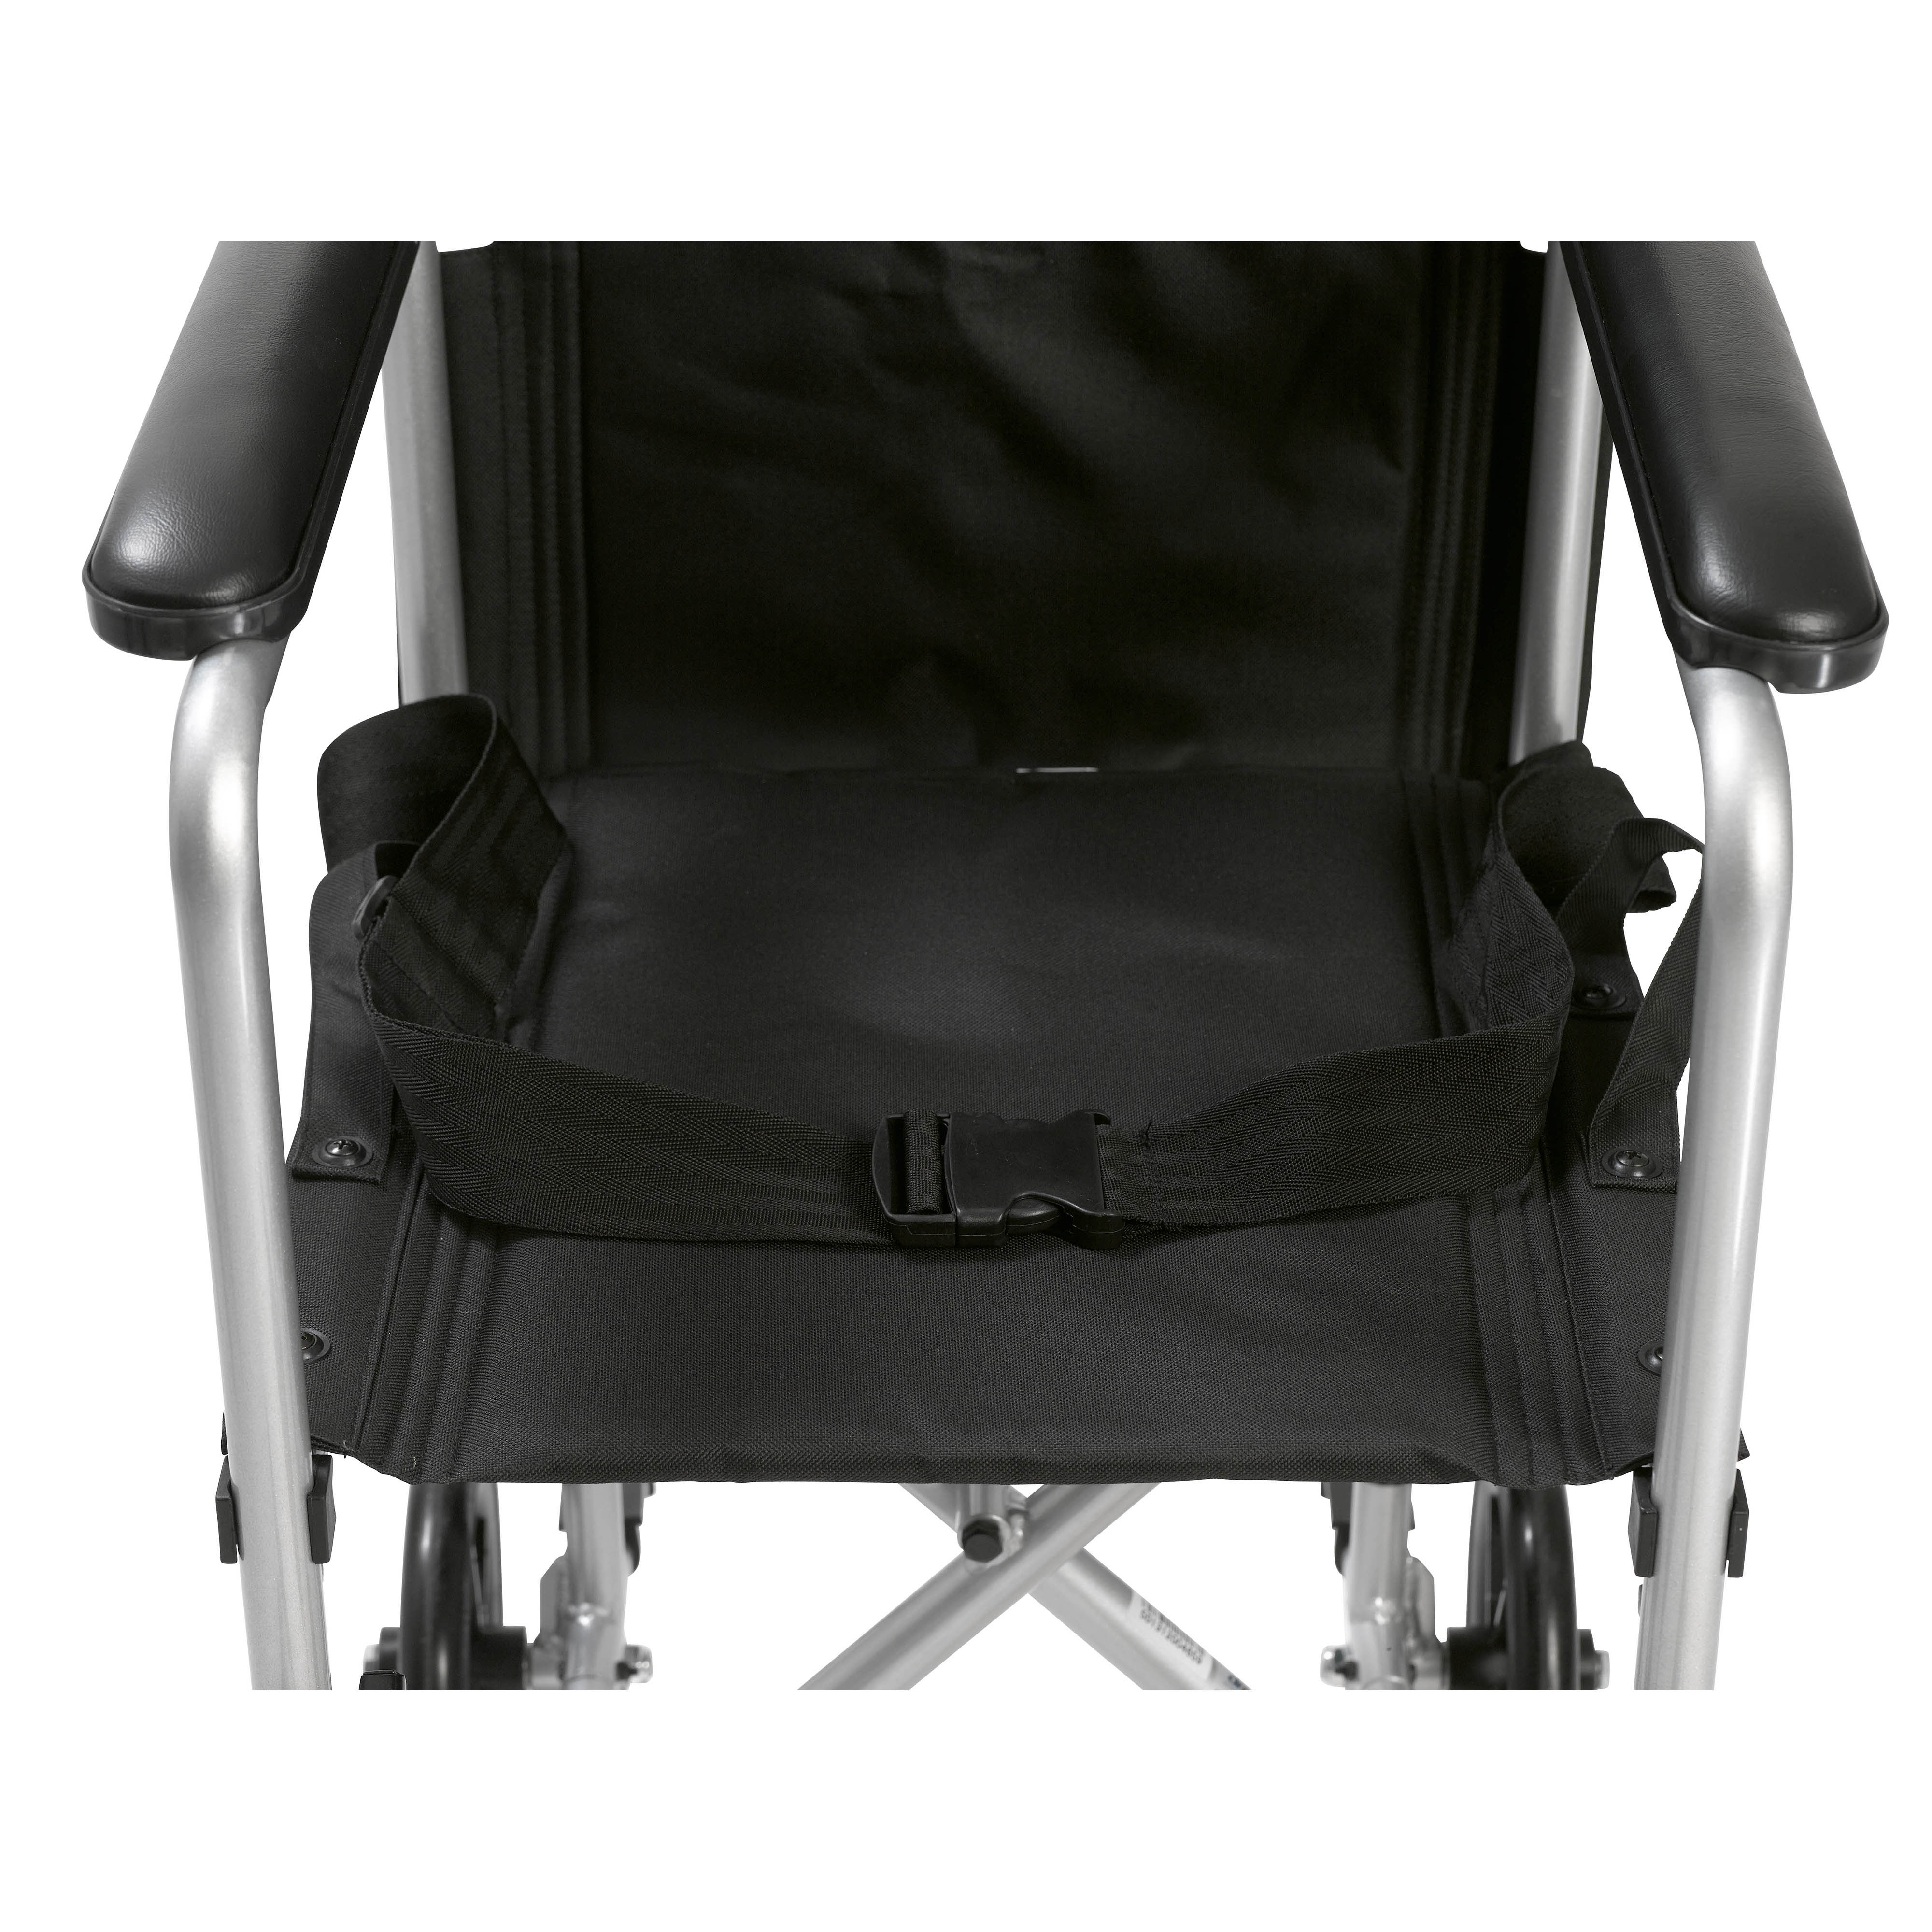 Drive Medical Lightweight Transport Wheelchair, 19" Seat, Silver - image 5 of 6